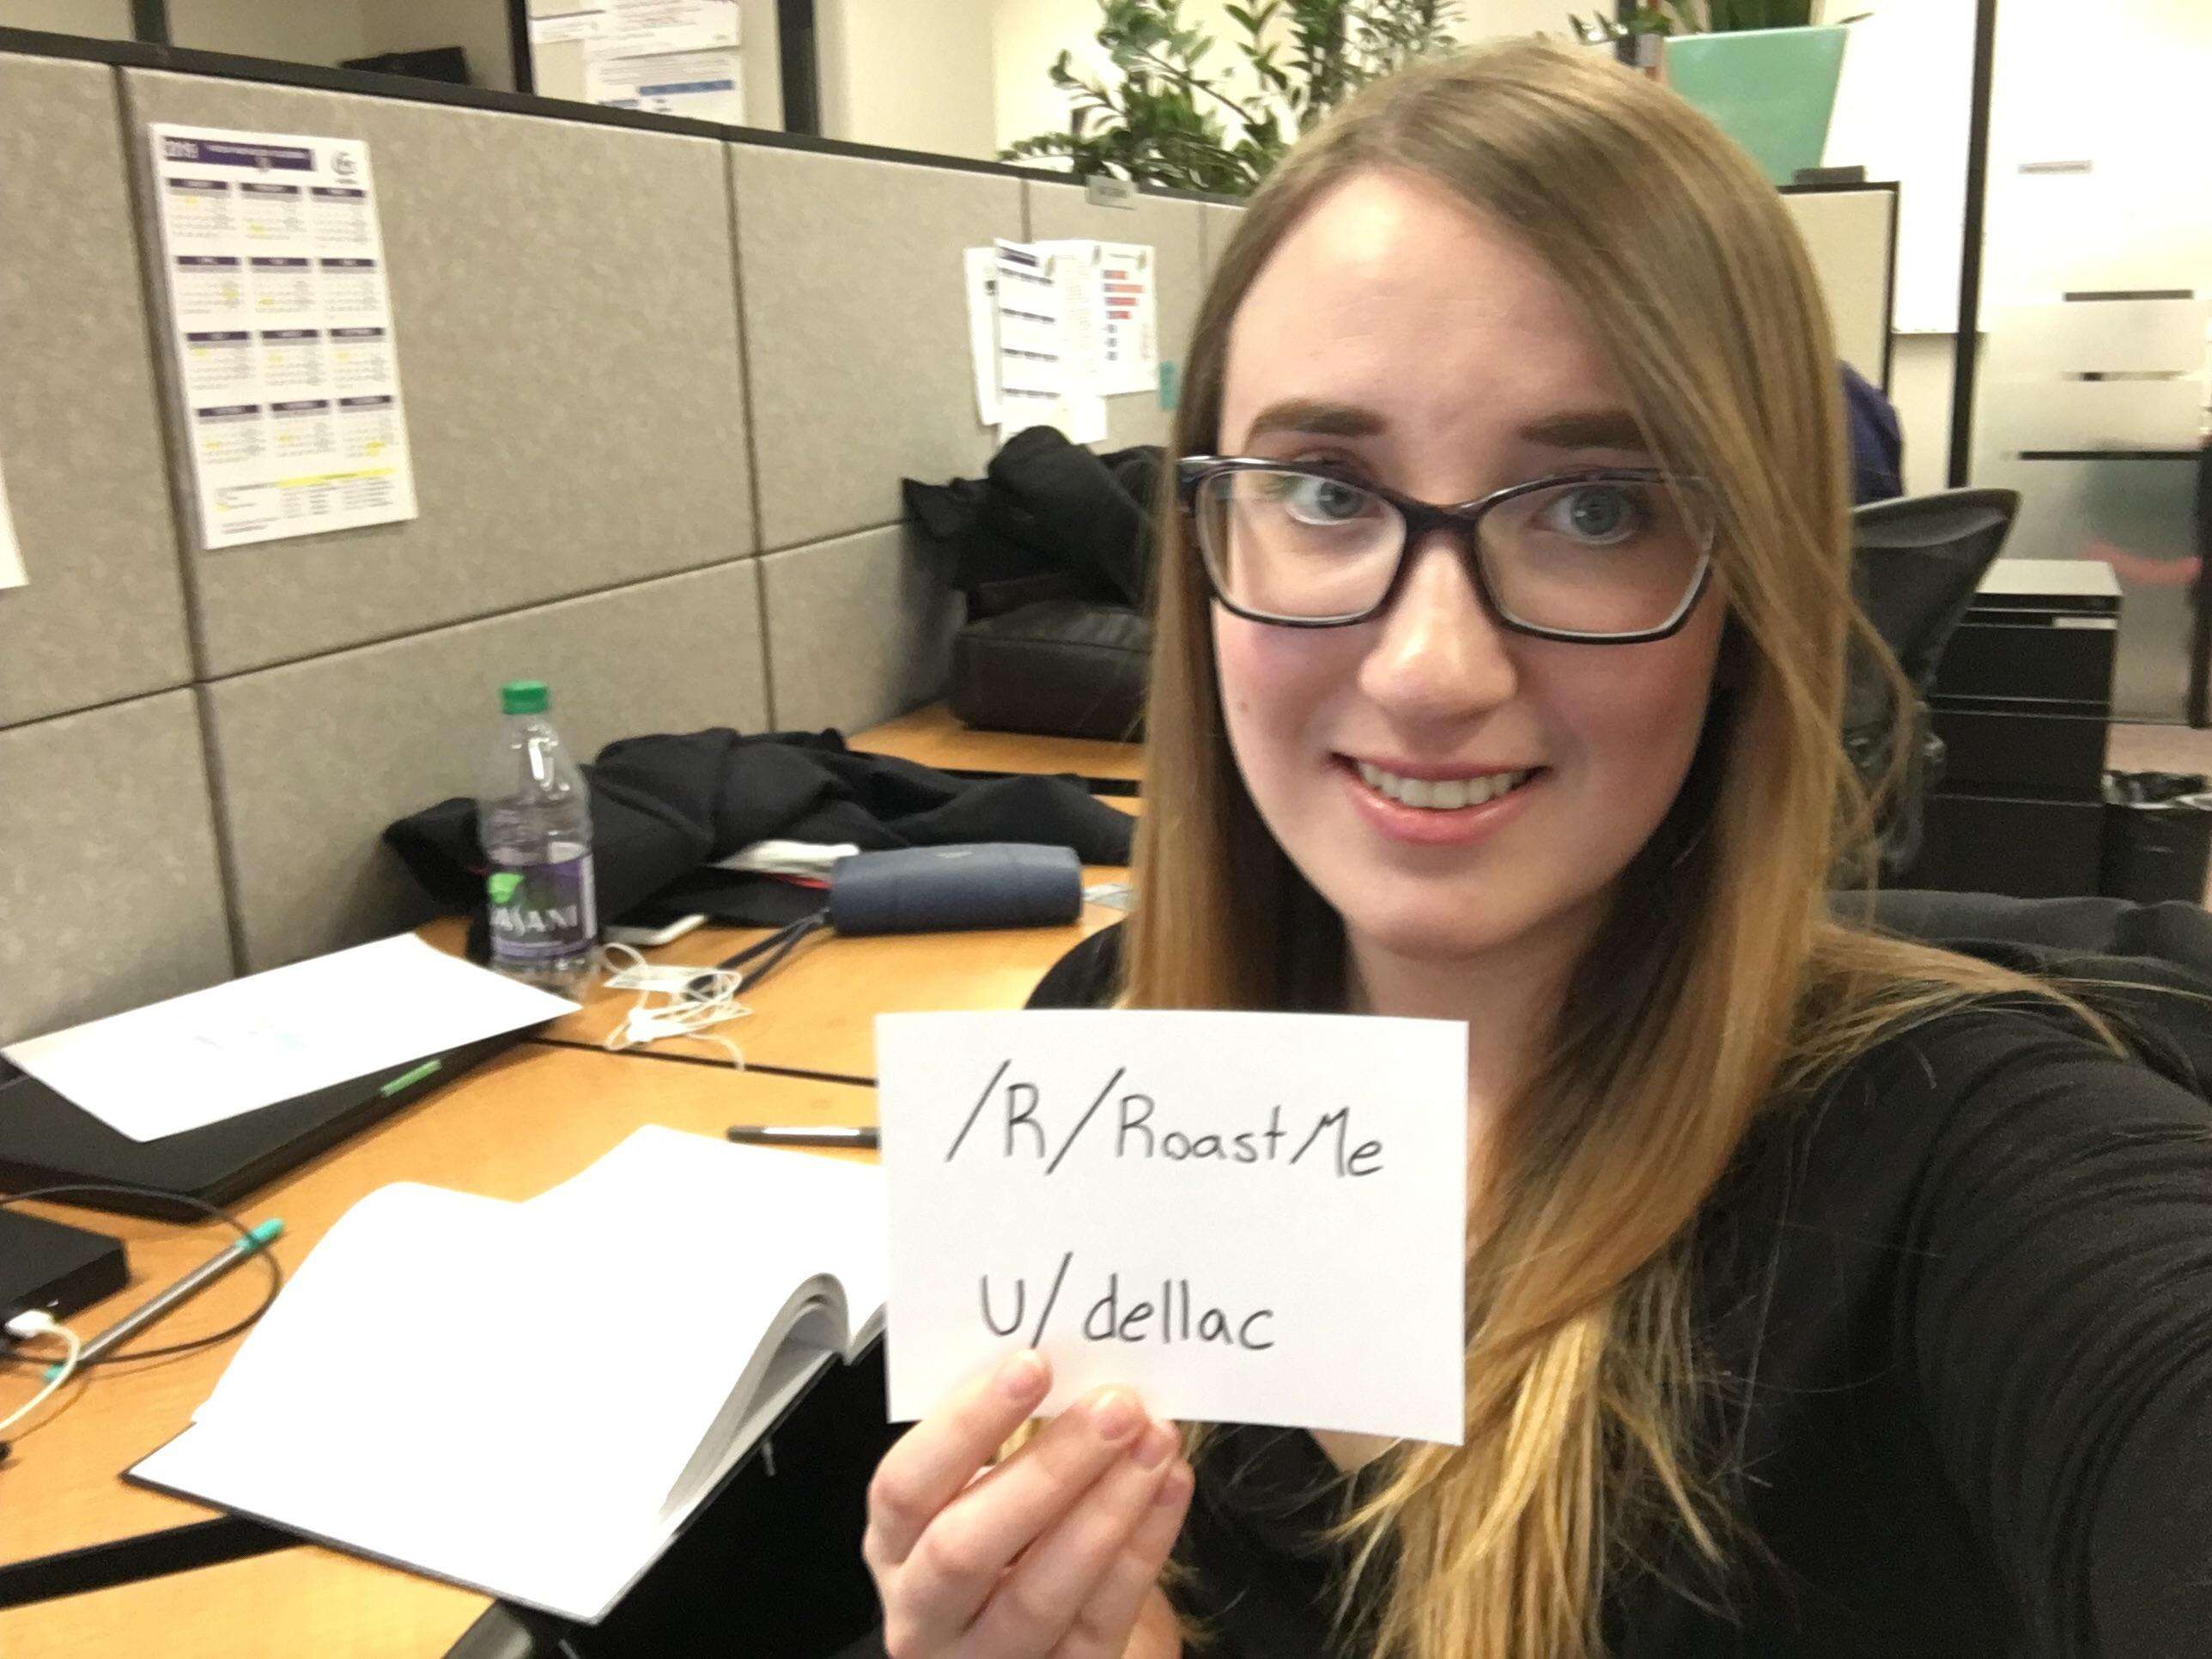 image showing As a woman working in IT, I’m used to people saying fucked up shit to me. Roast me! I can handle it!